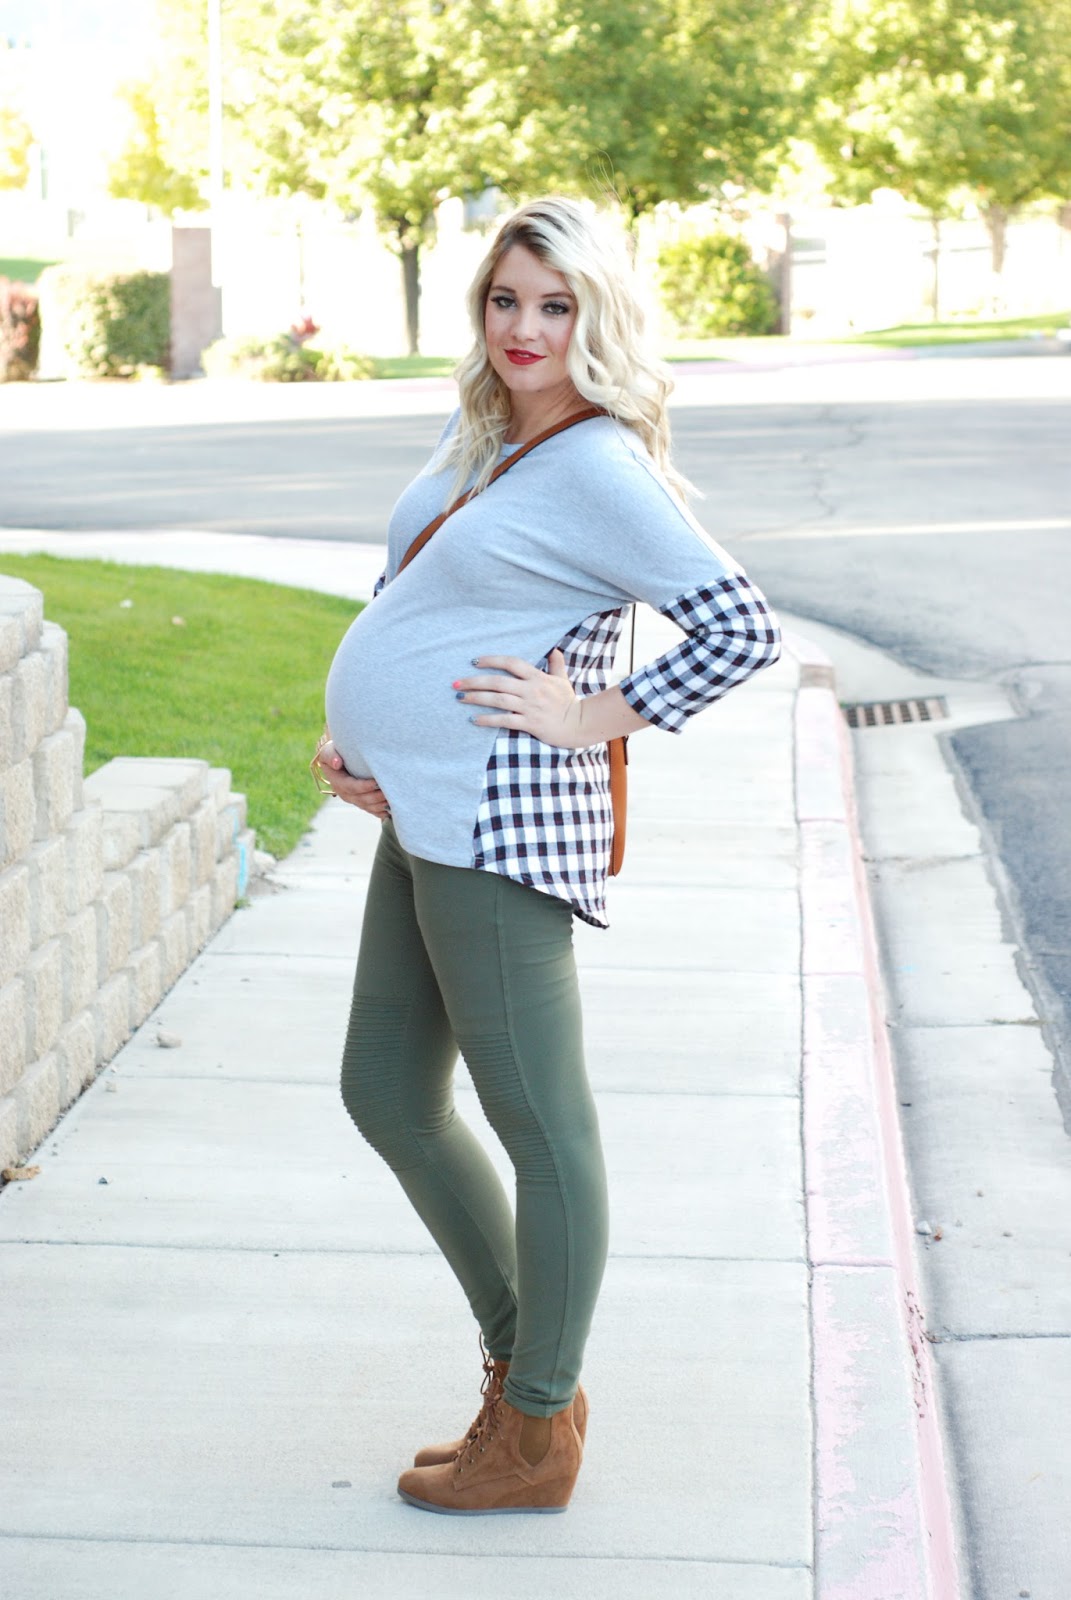 Plaid Shirt, Fall Outfit, Maternity Outfit, Pregnant Style